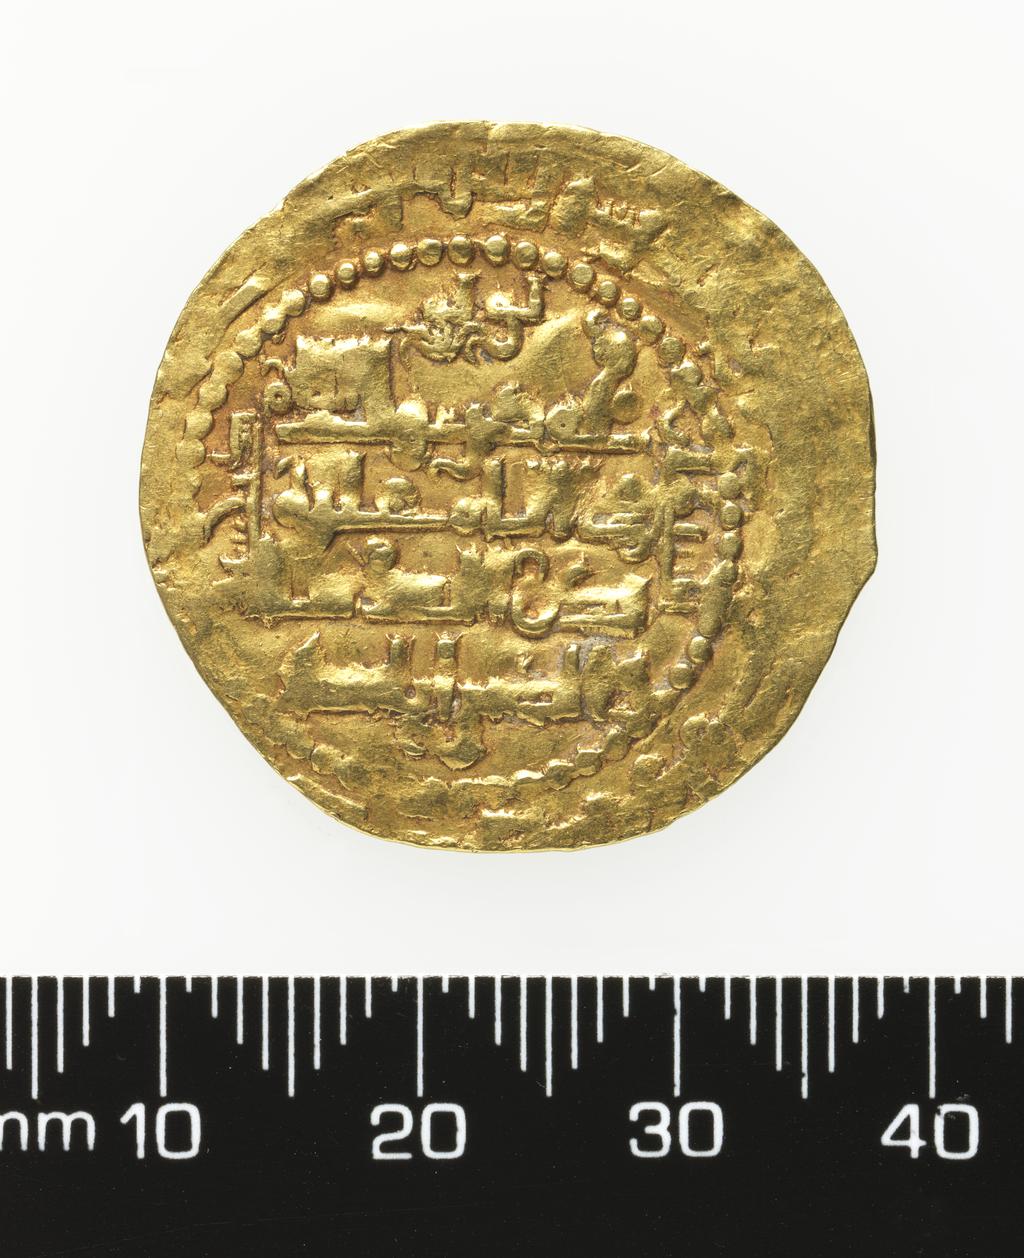 An image of Coinage. Islamic Coin: Dinar. Badr al-Din Lu'lu' (1233-58), ruler. Mosul, Al-Mawsil, Mint. The Atabegs & Contemporaries. Lu'lu'ids. Obverse: Central legend; mint and date formula in inner margin, outer circle, outer margin. Reverse: Legend in dotted circle, legend r. vertically upwards and l. vertically downwards. Gold, height 28 mm, width 29 mm, weight 5.14 g, 1233-1258.